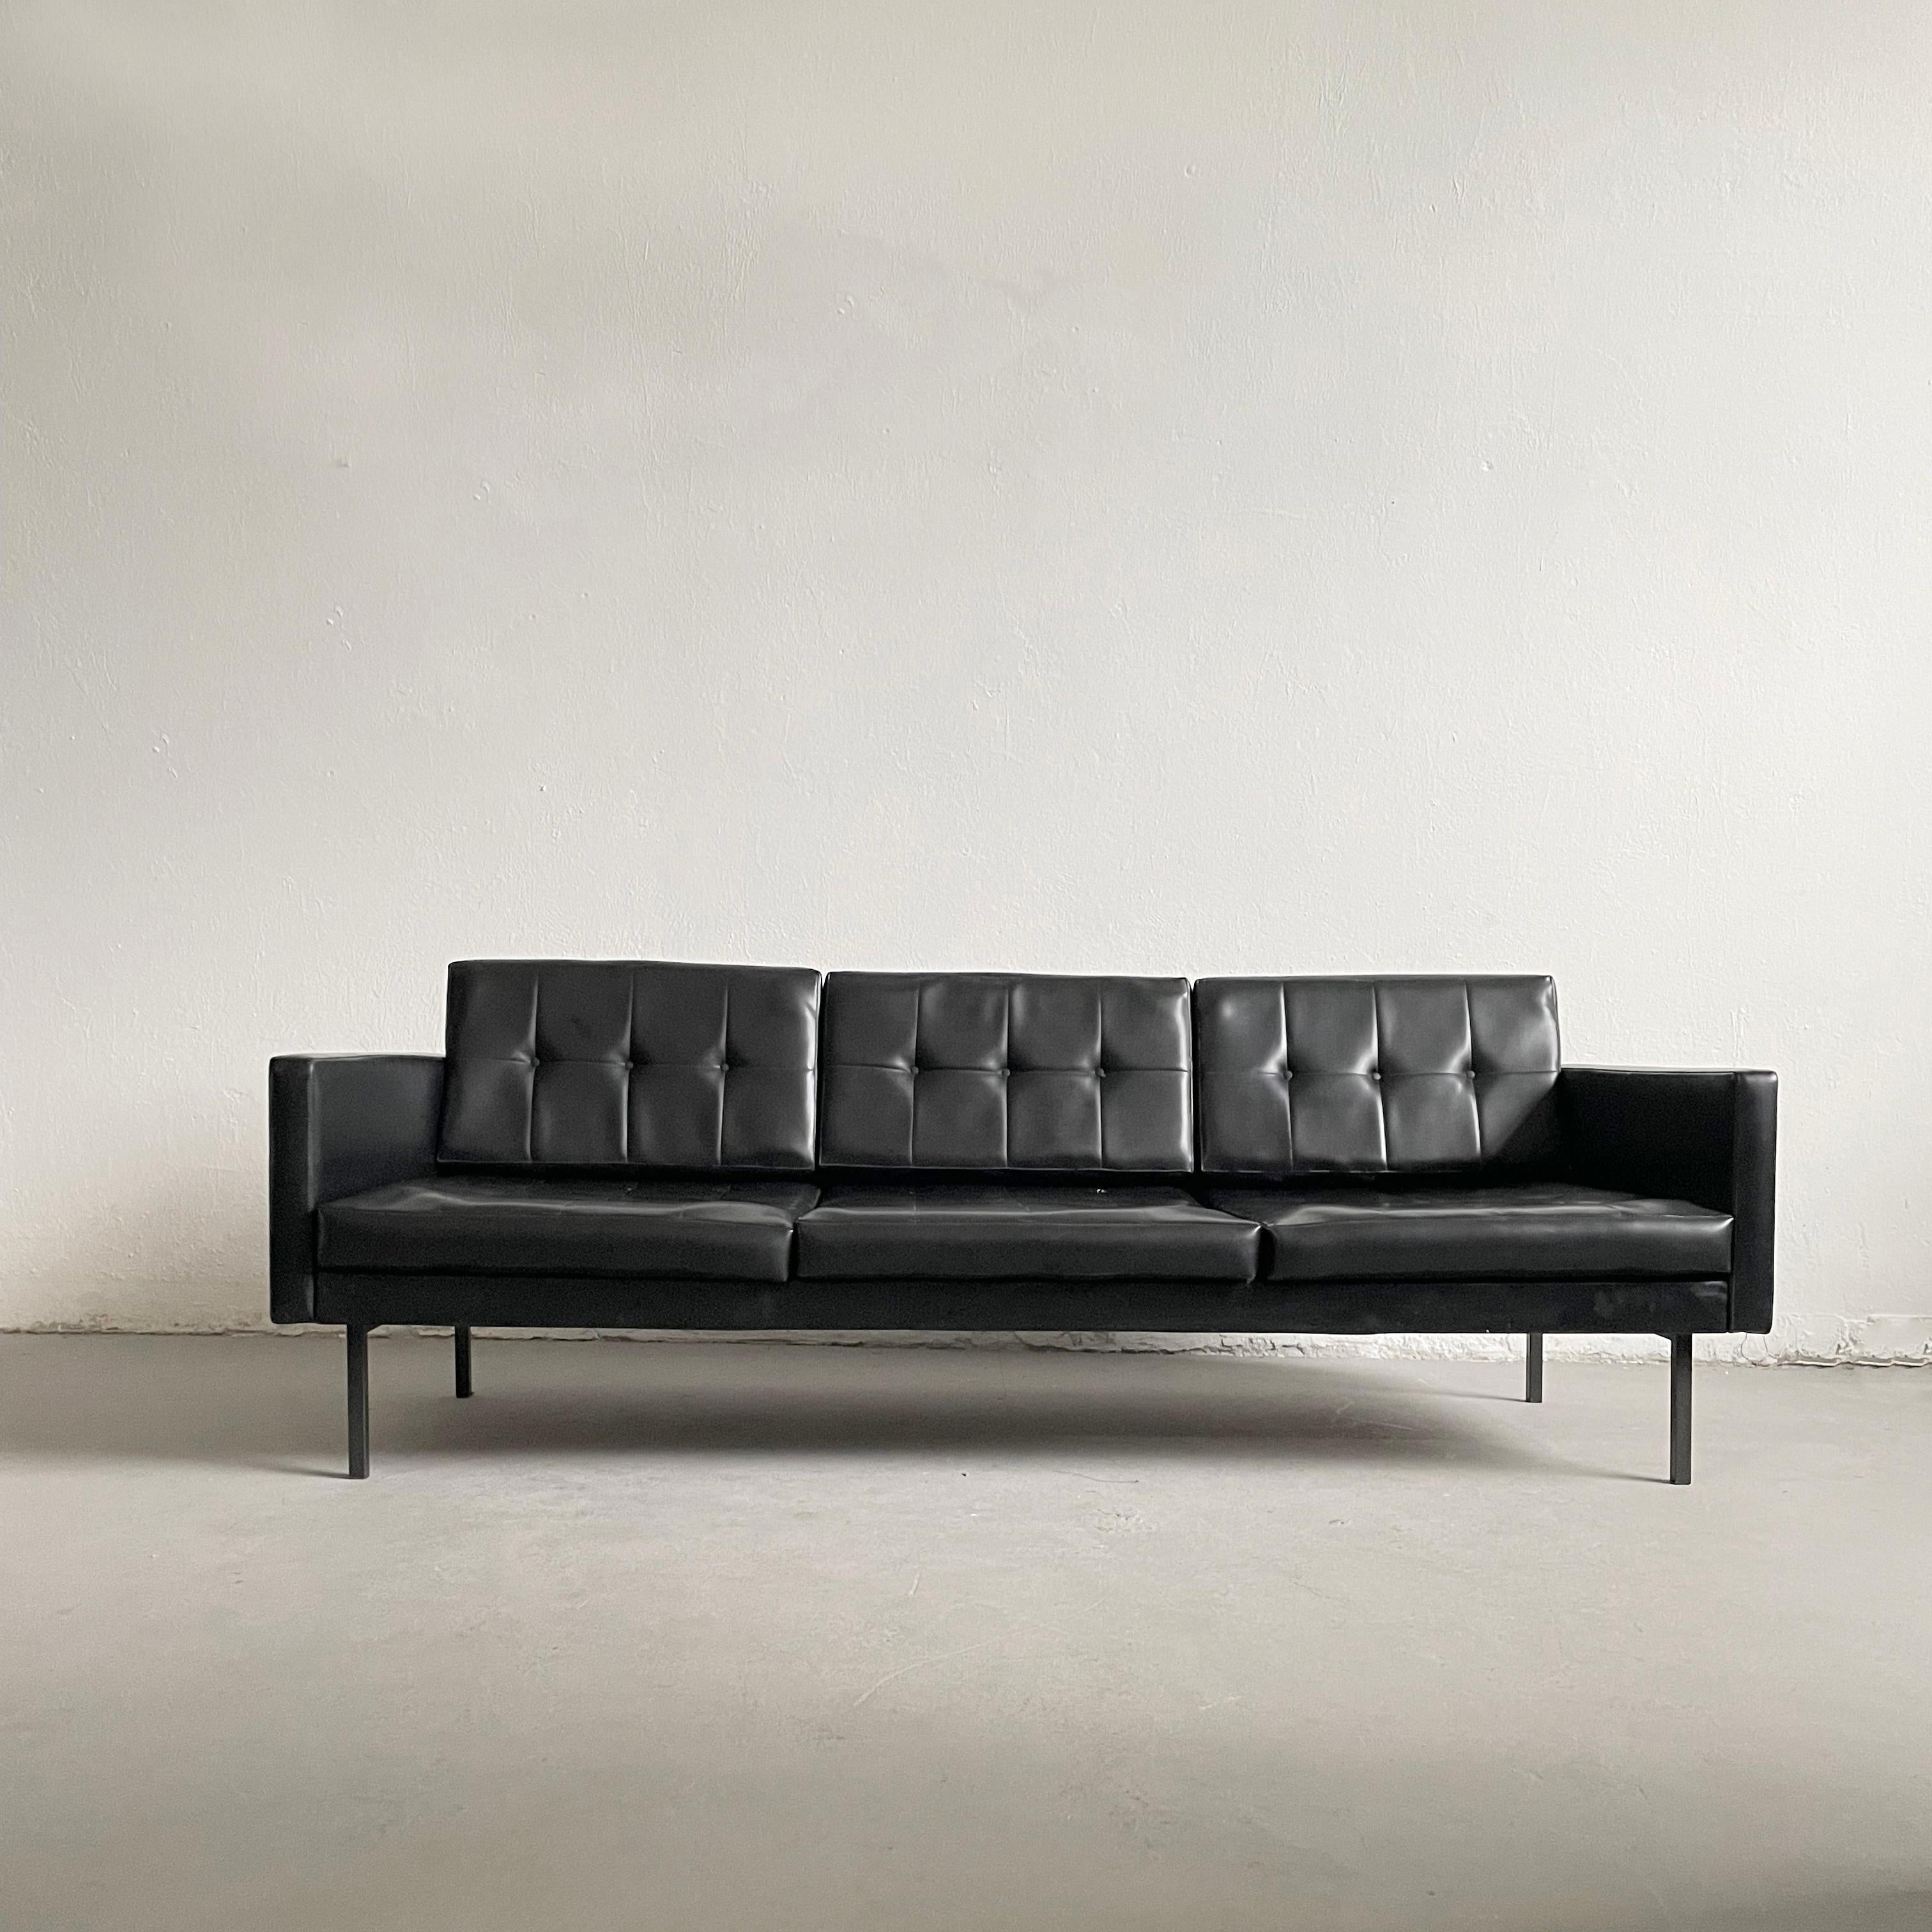 Vintage Danish modern style 3-seater sofa manufactured by Stol, Slovenia 1960s

Wooden frame is upholstered in original glossy black vinyl and it's supported by 4 metal legs. The sofa has 6 removable cushions and adjustable backrest. 

The sofa is